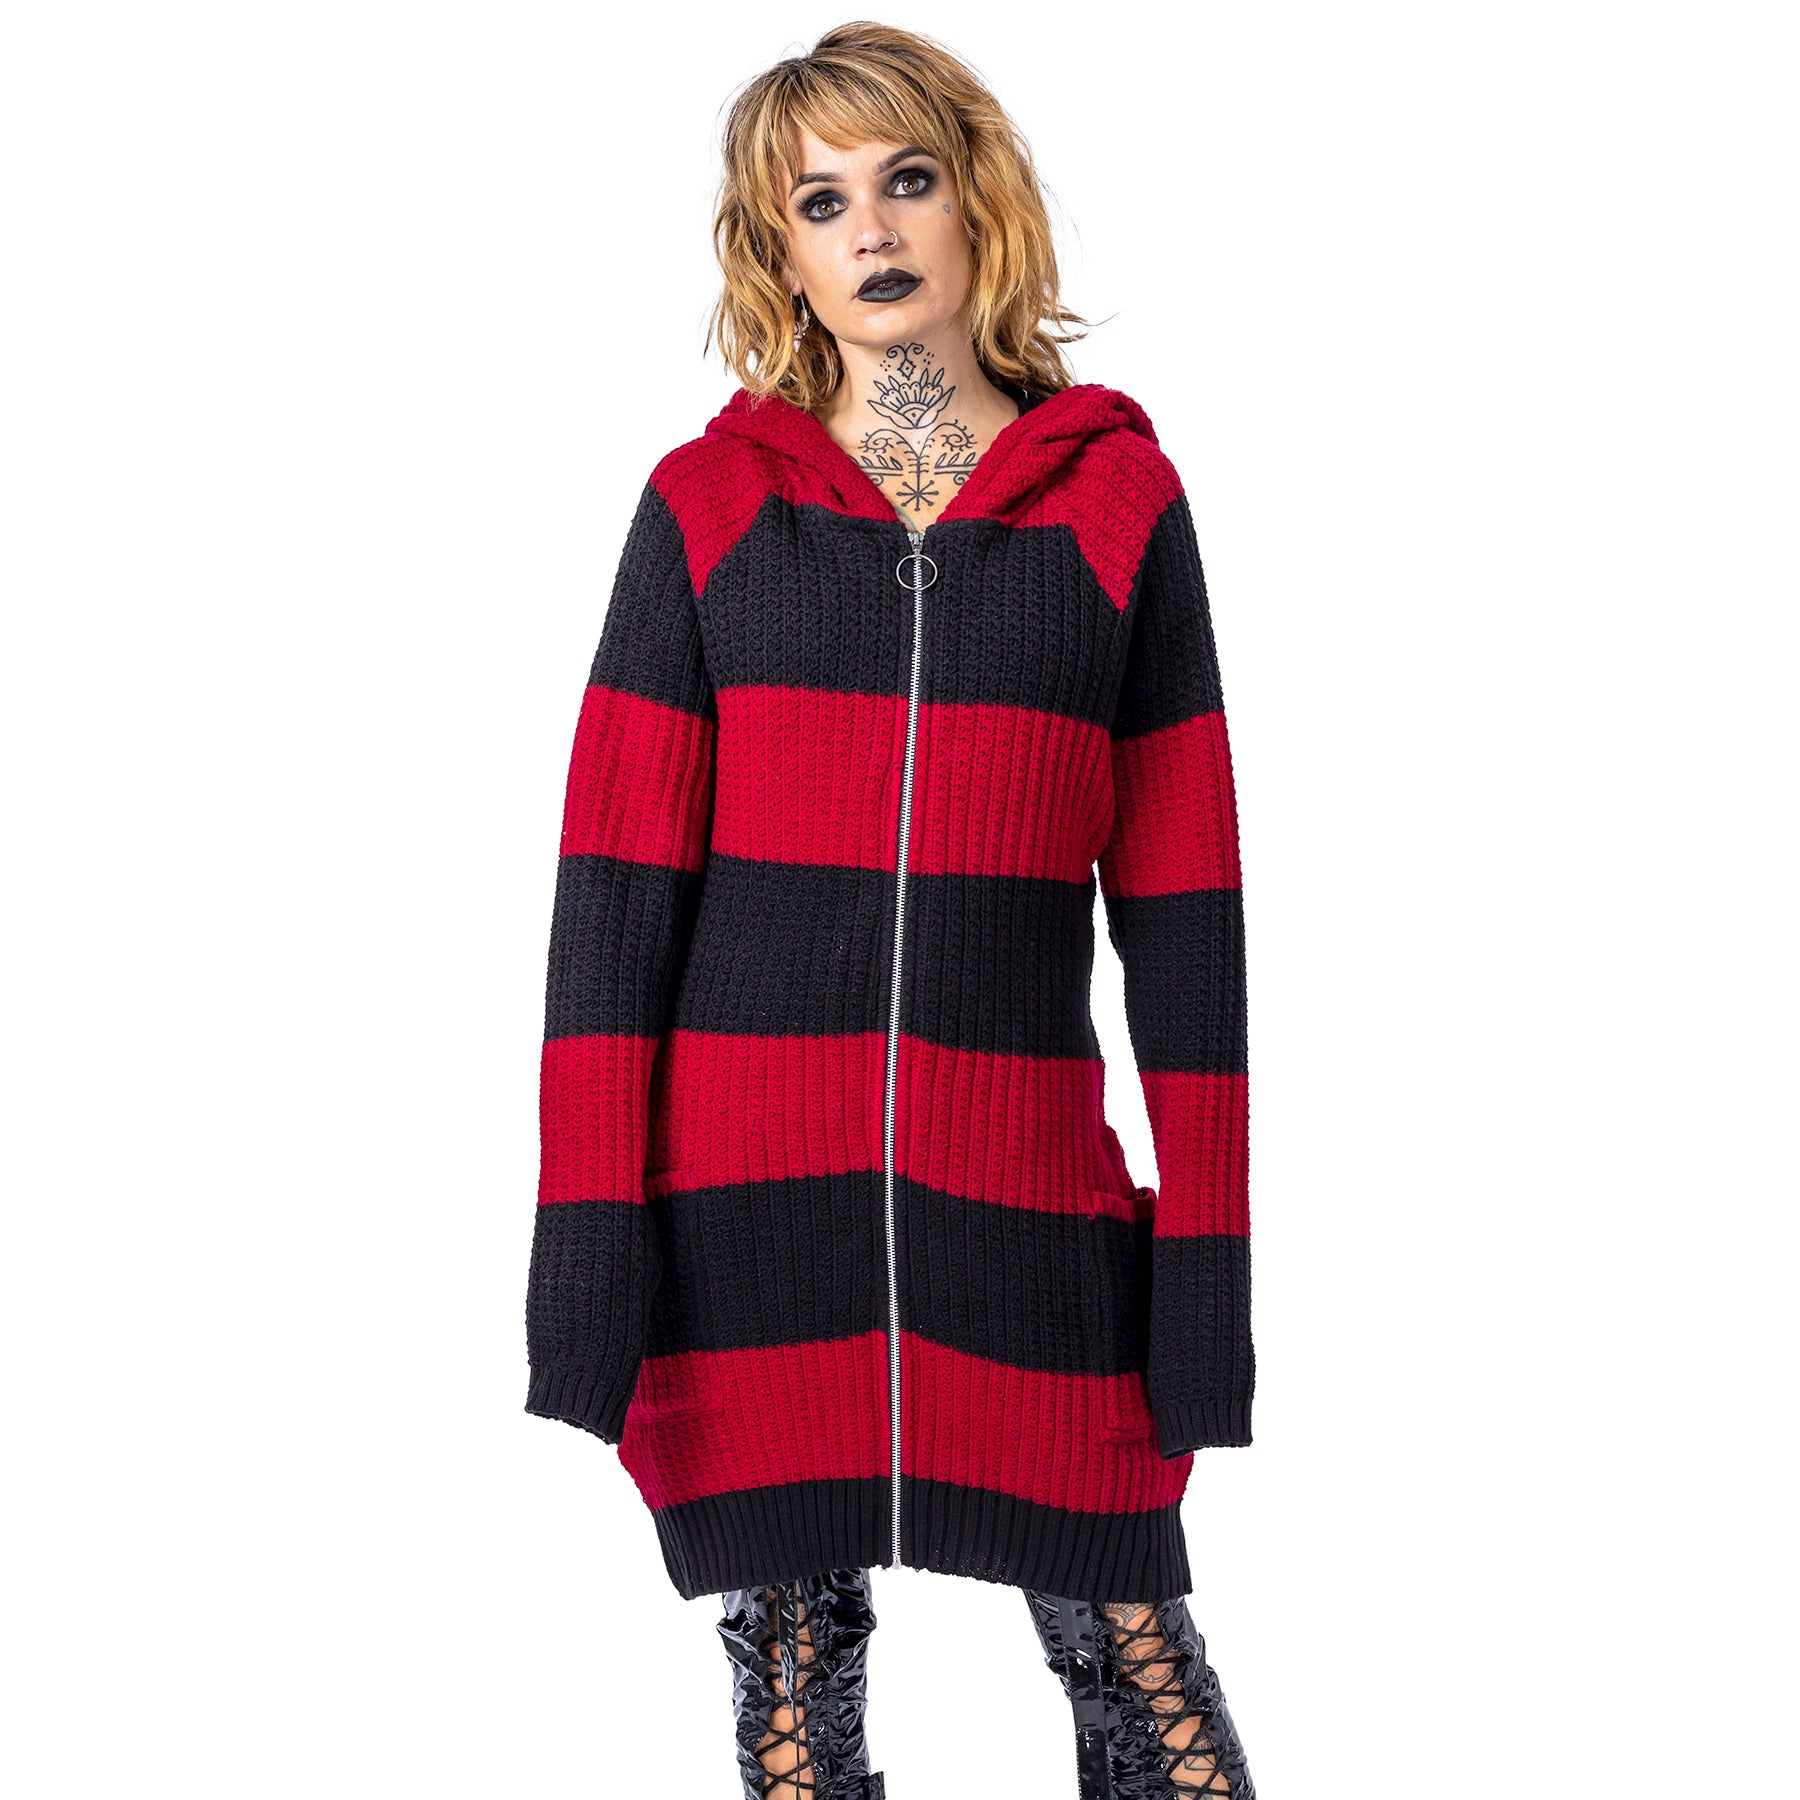 Poizen Industries Esther Cardigan - Red & Black - Kate's Clothing